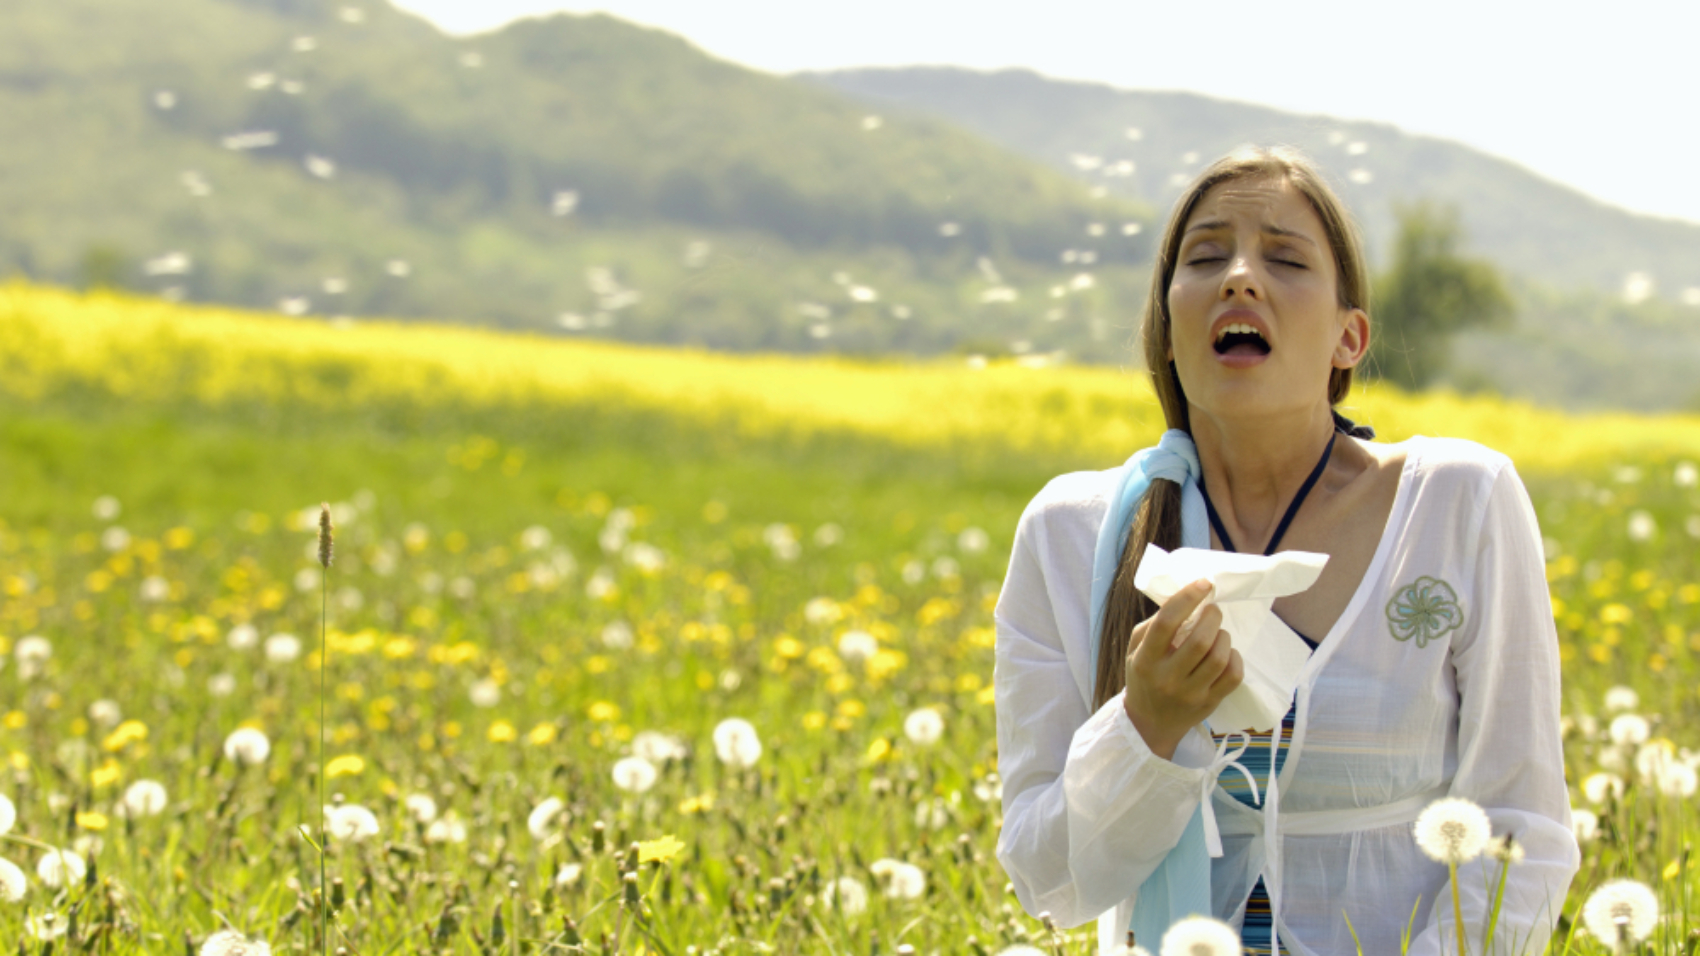 Woman,Sneezing,With,Tissue,In,Meadow